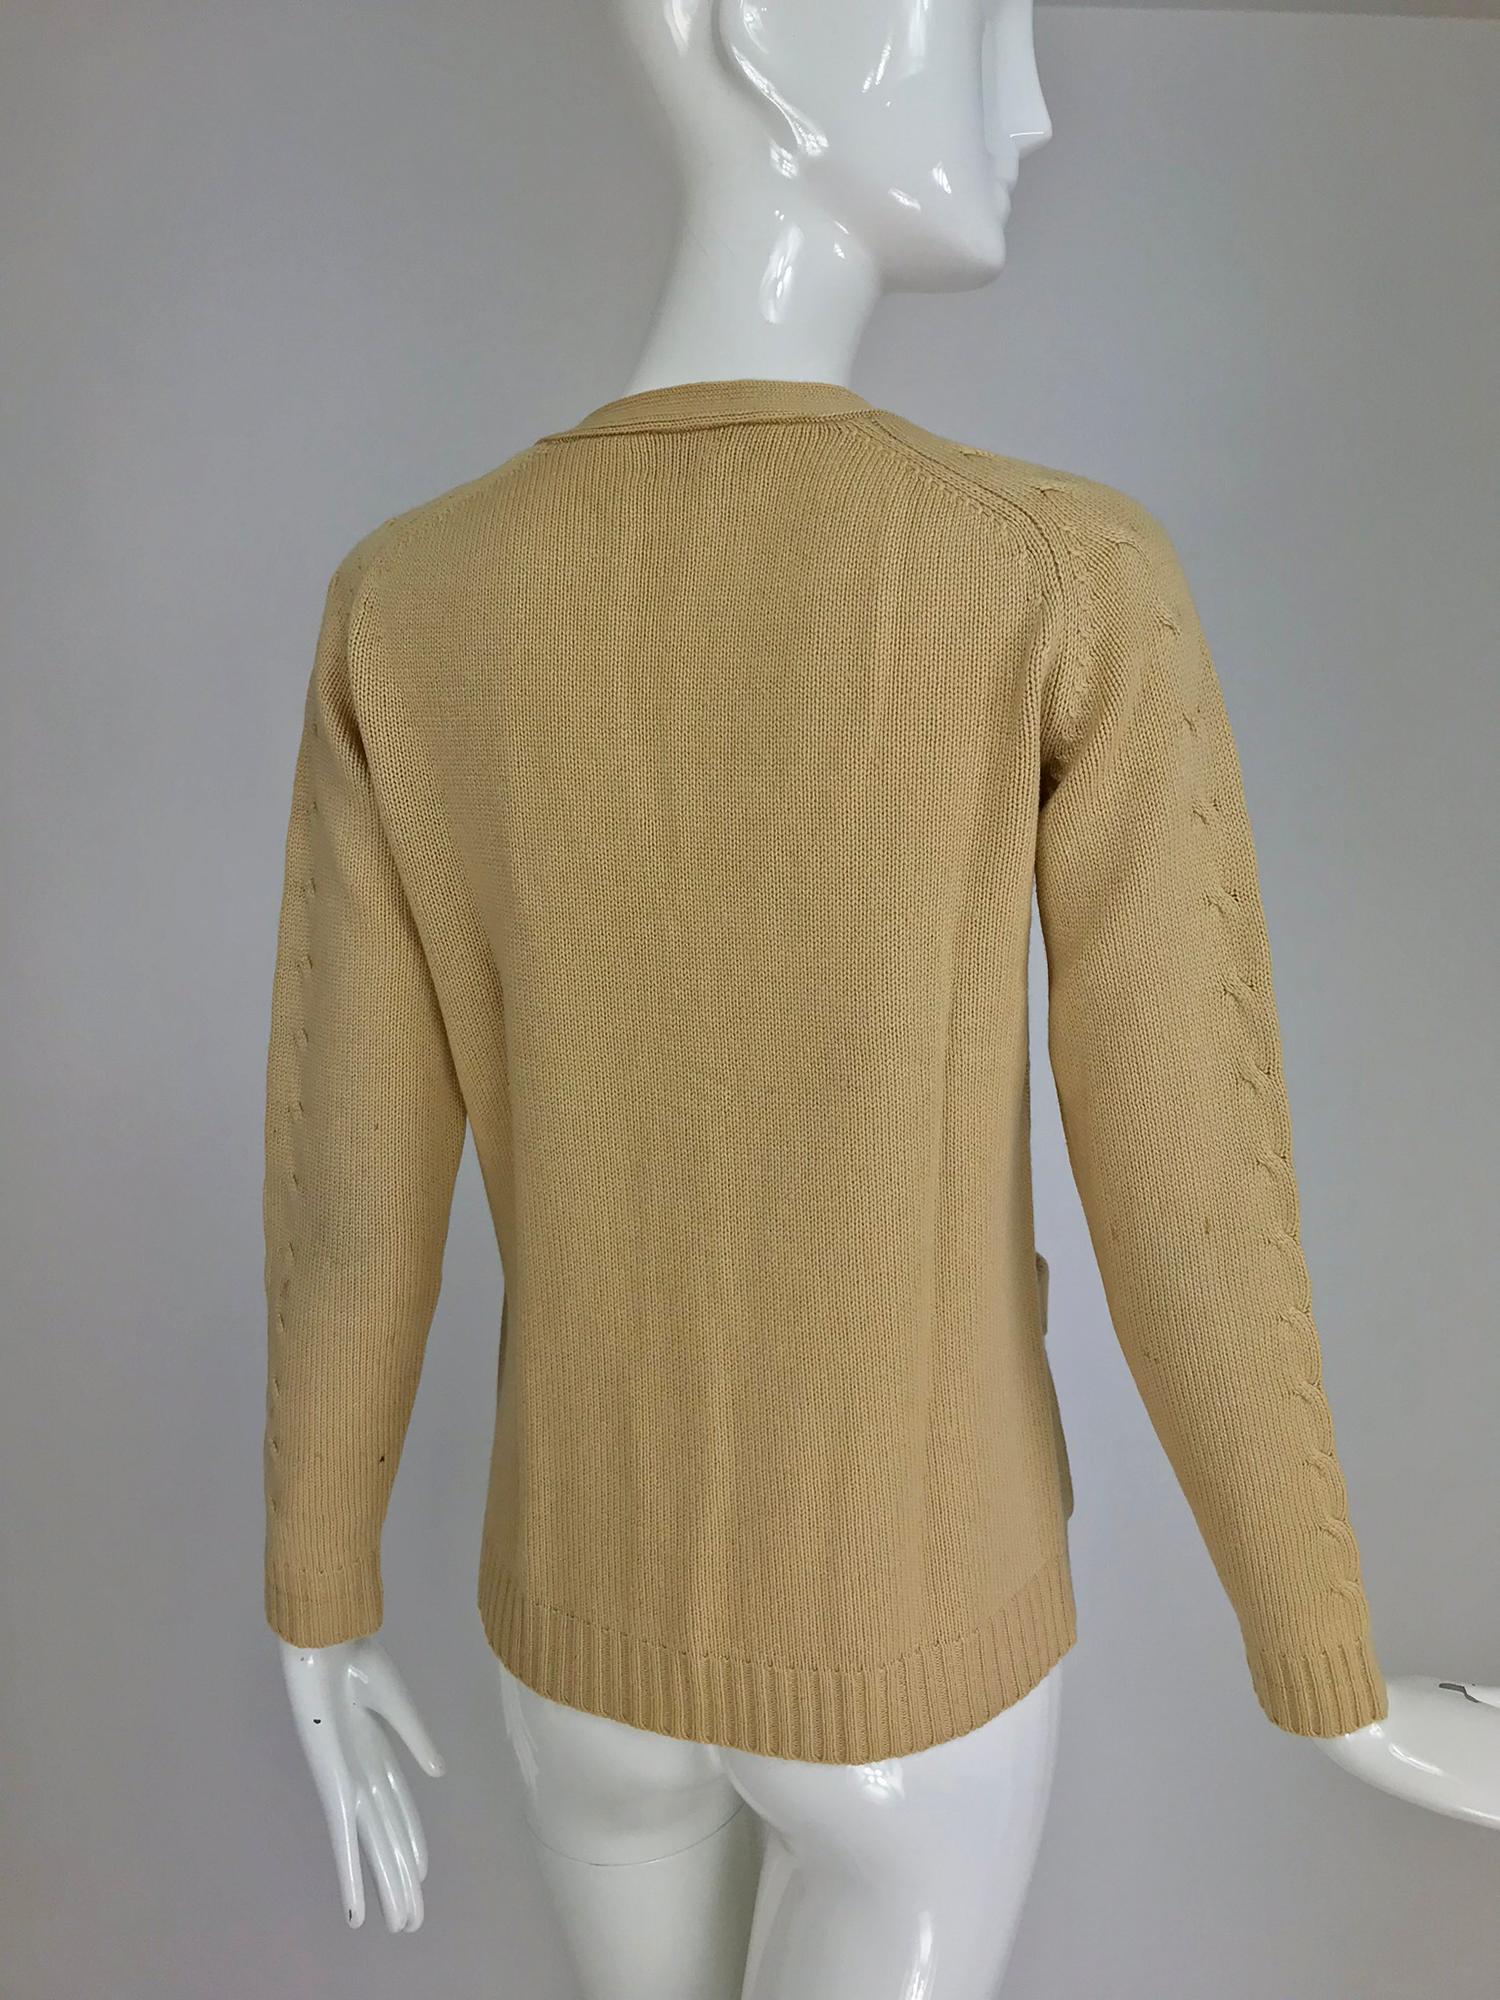 Brown Hermes tan cashmere silk cable knit cardigan sweater 1960s For Sale